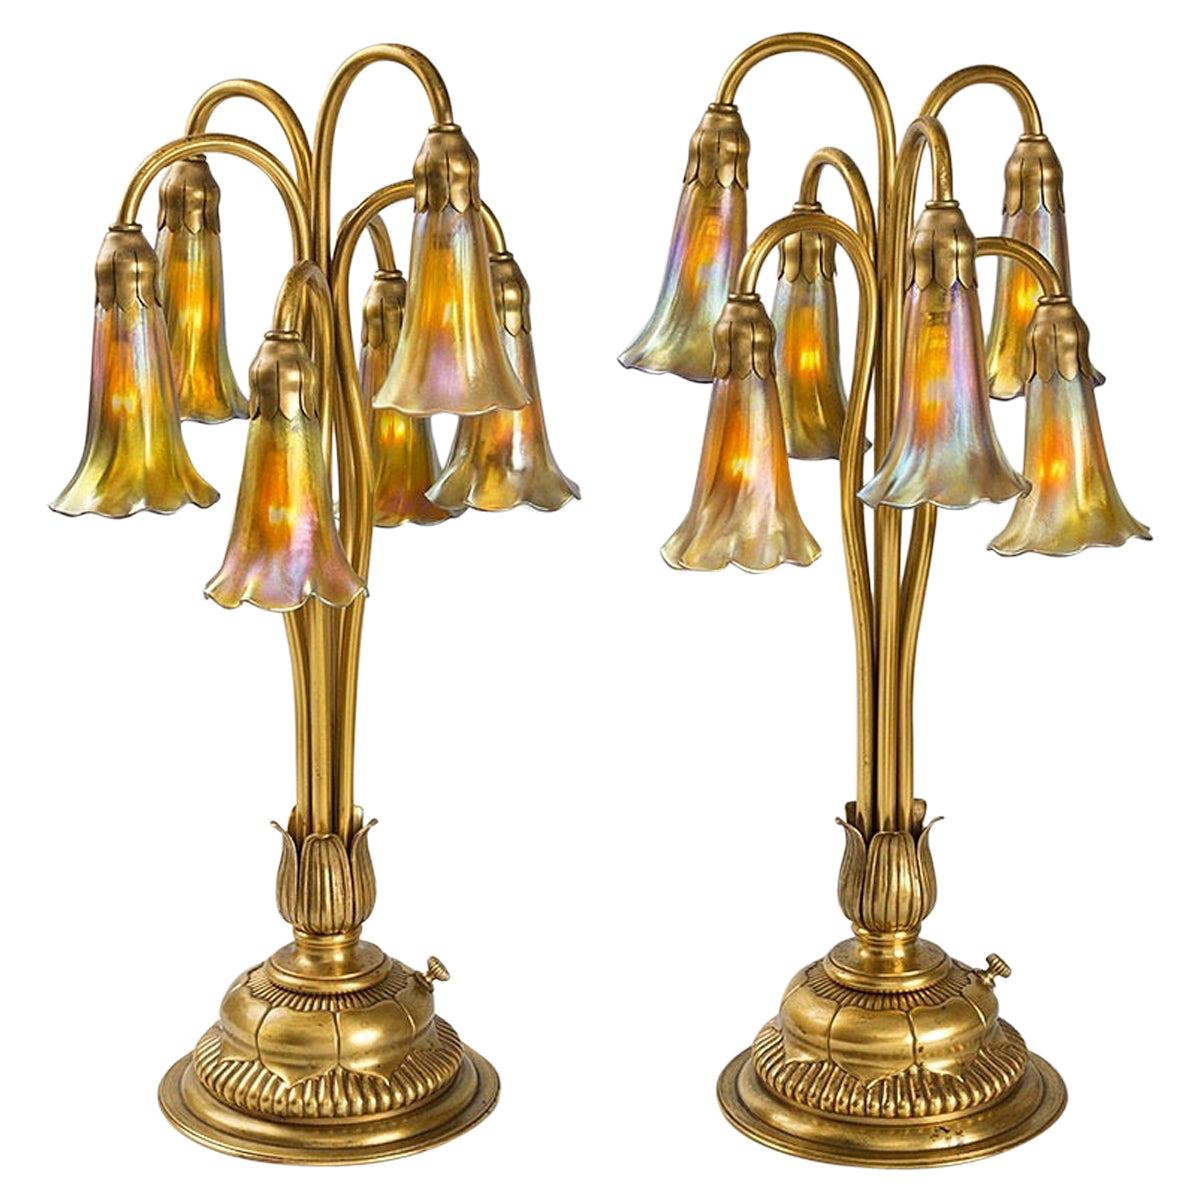 Pair of Gilt "Six-Light Lily" Tiffany Lamps